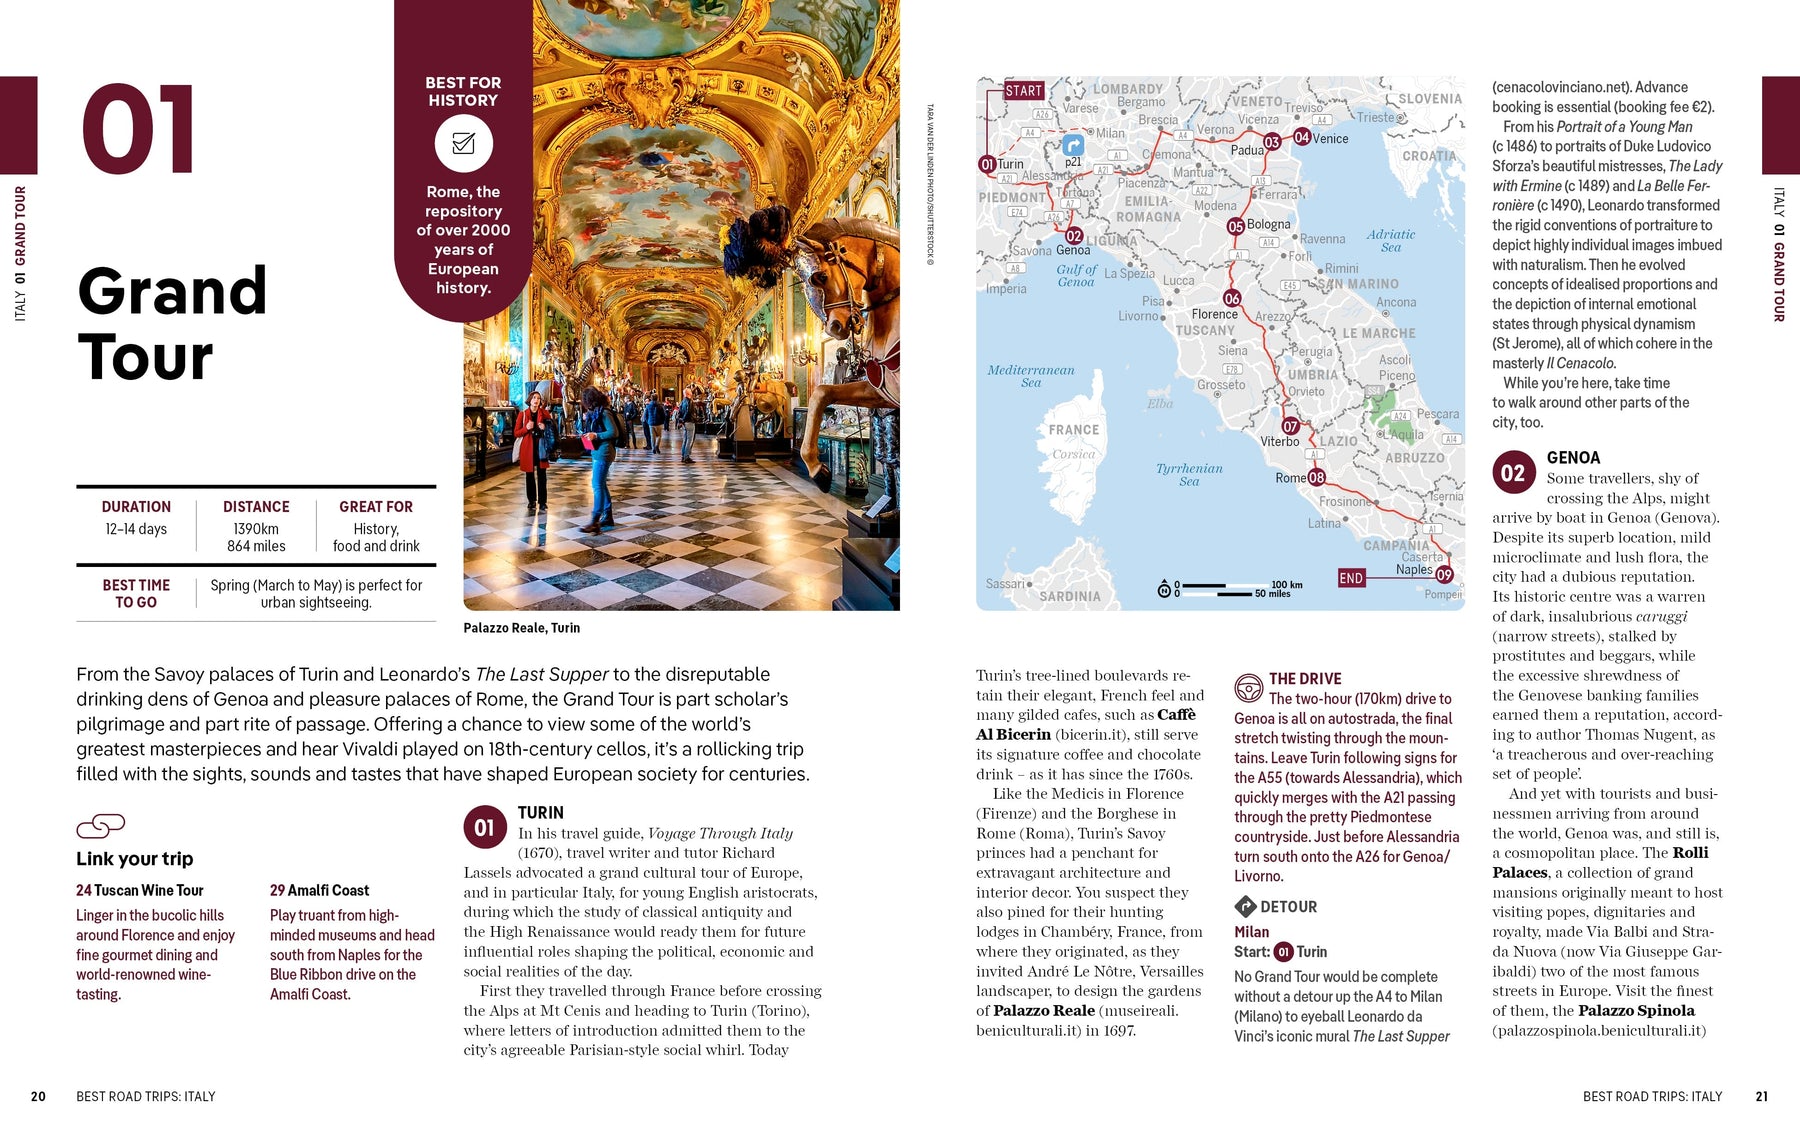 Road Trip in Italy along the historic Grand Tour itinerary